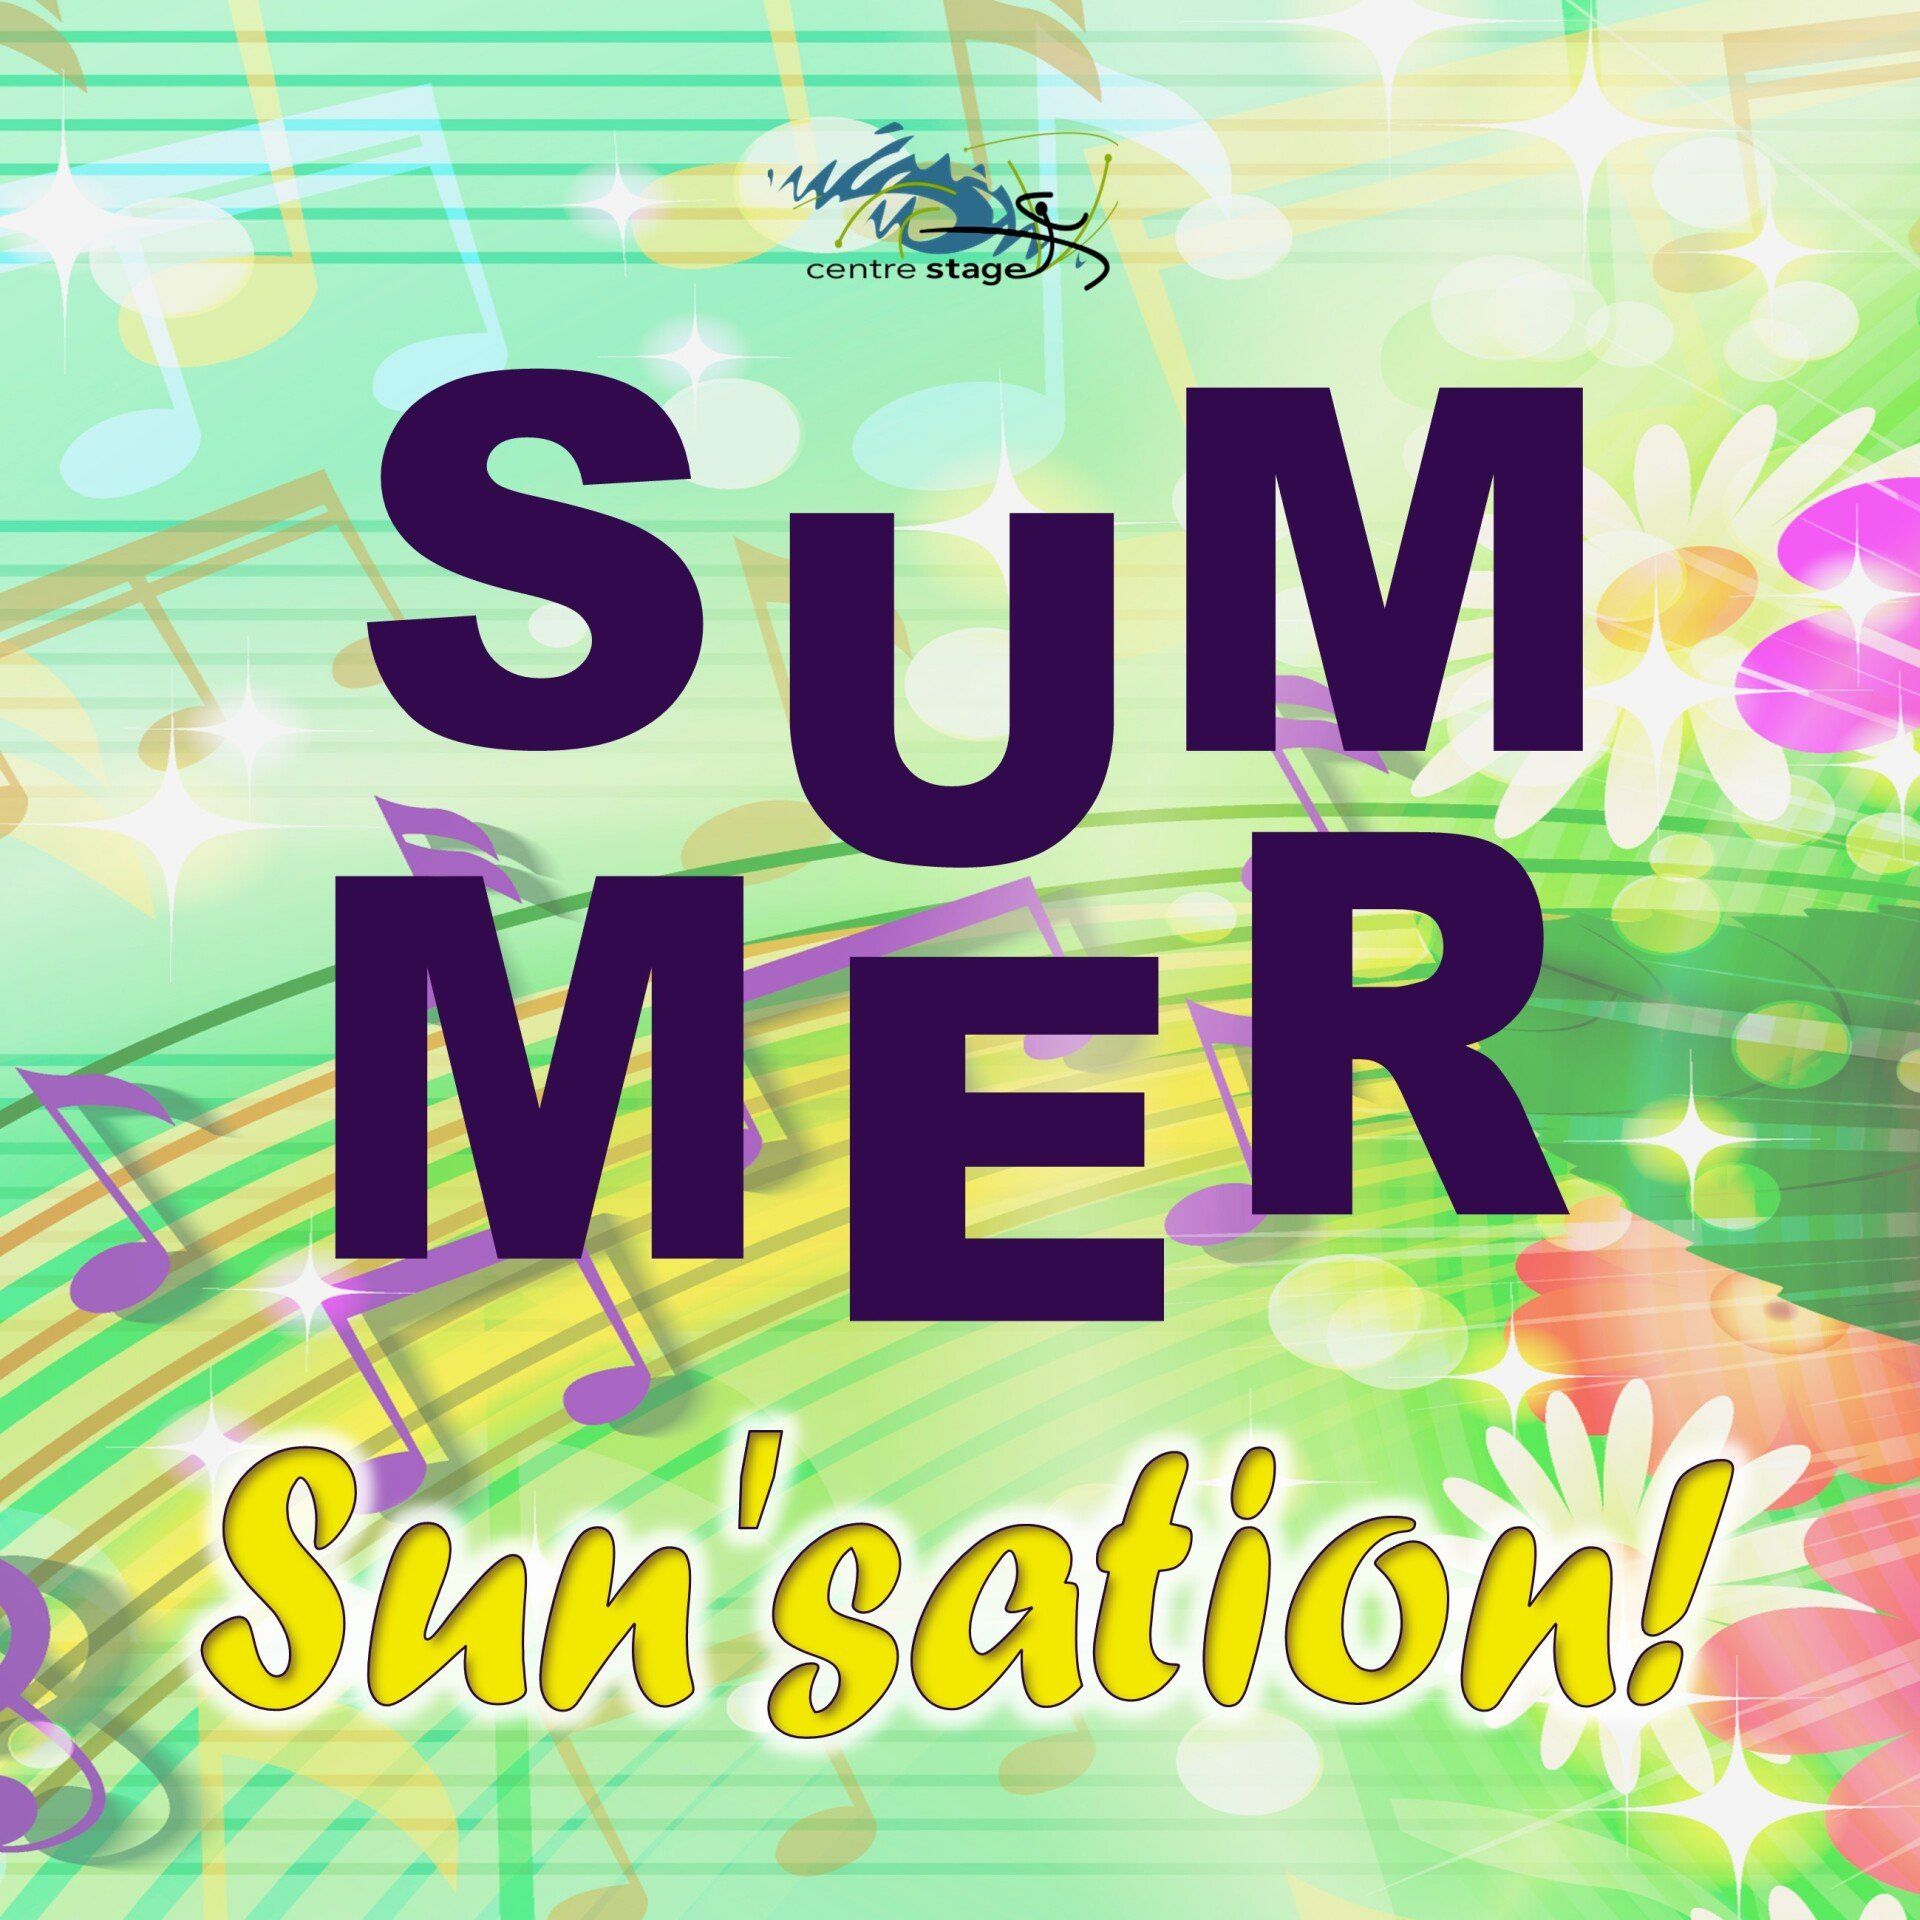 A poster that says summer sun 'sation on it